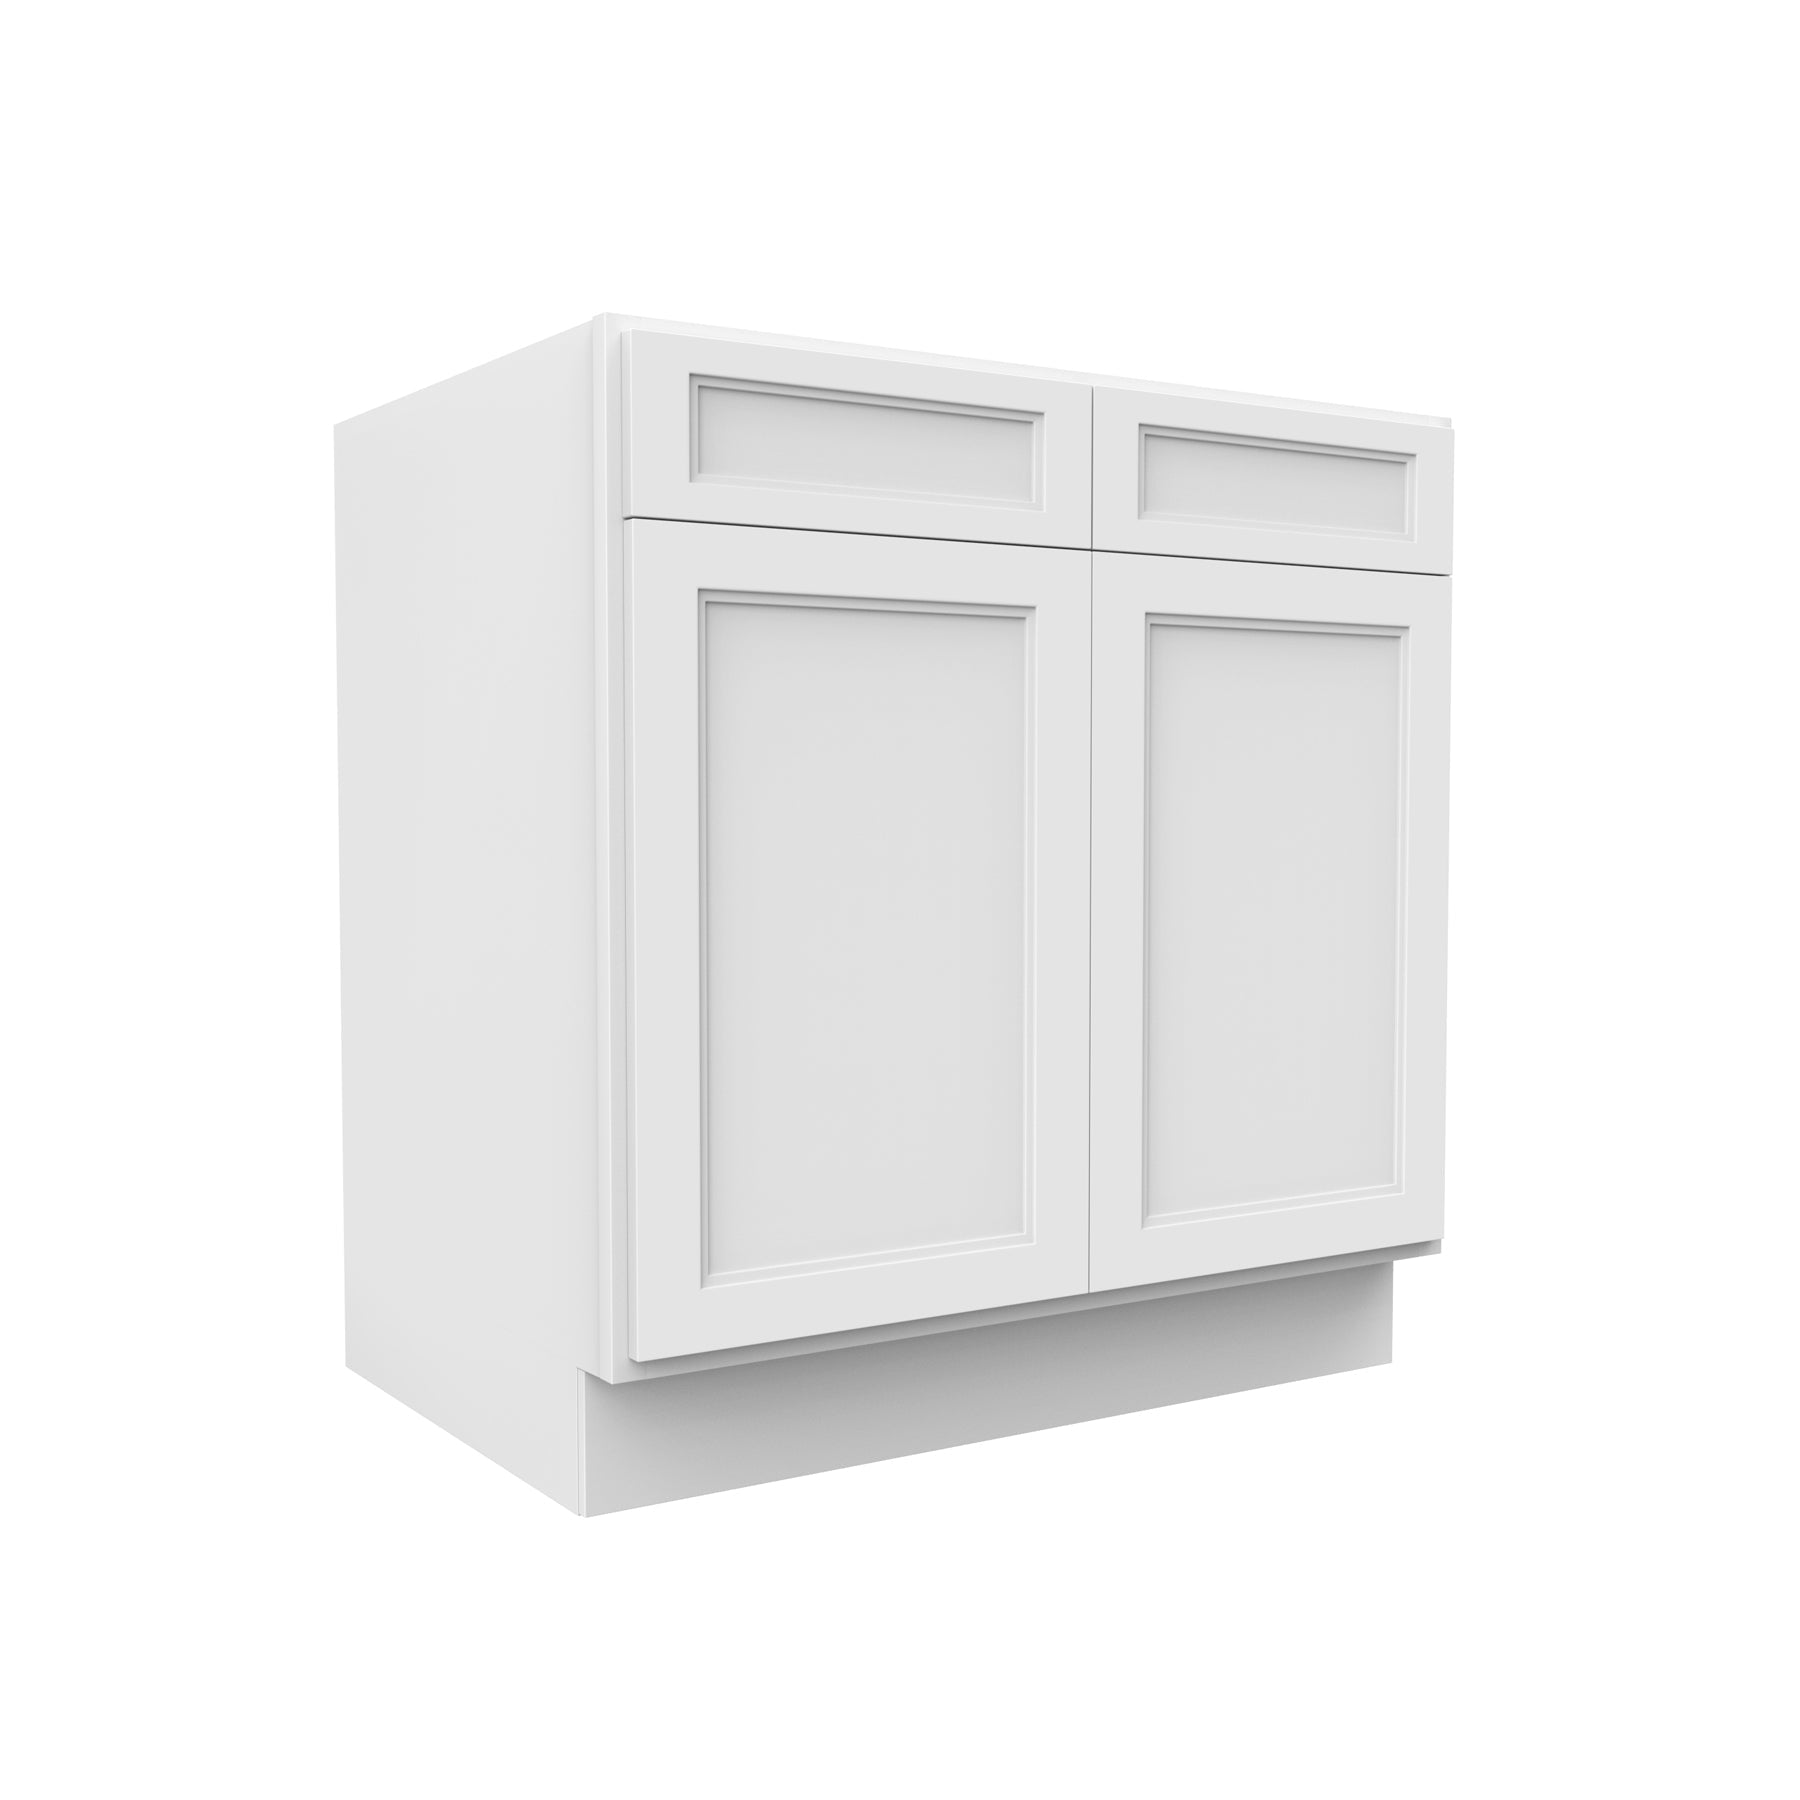 RTA - Fashion White - Double Drawer Front 2 Door Sink Base Cabinet | 36"W x 34.5"H x 24"D